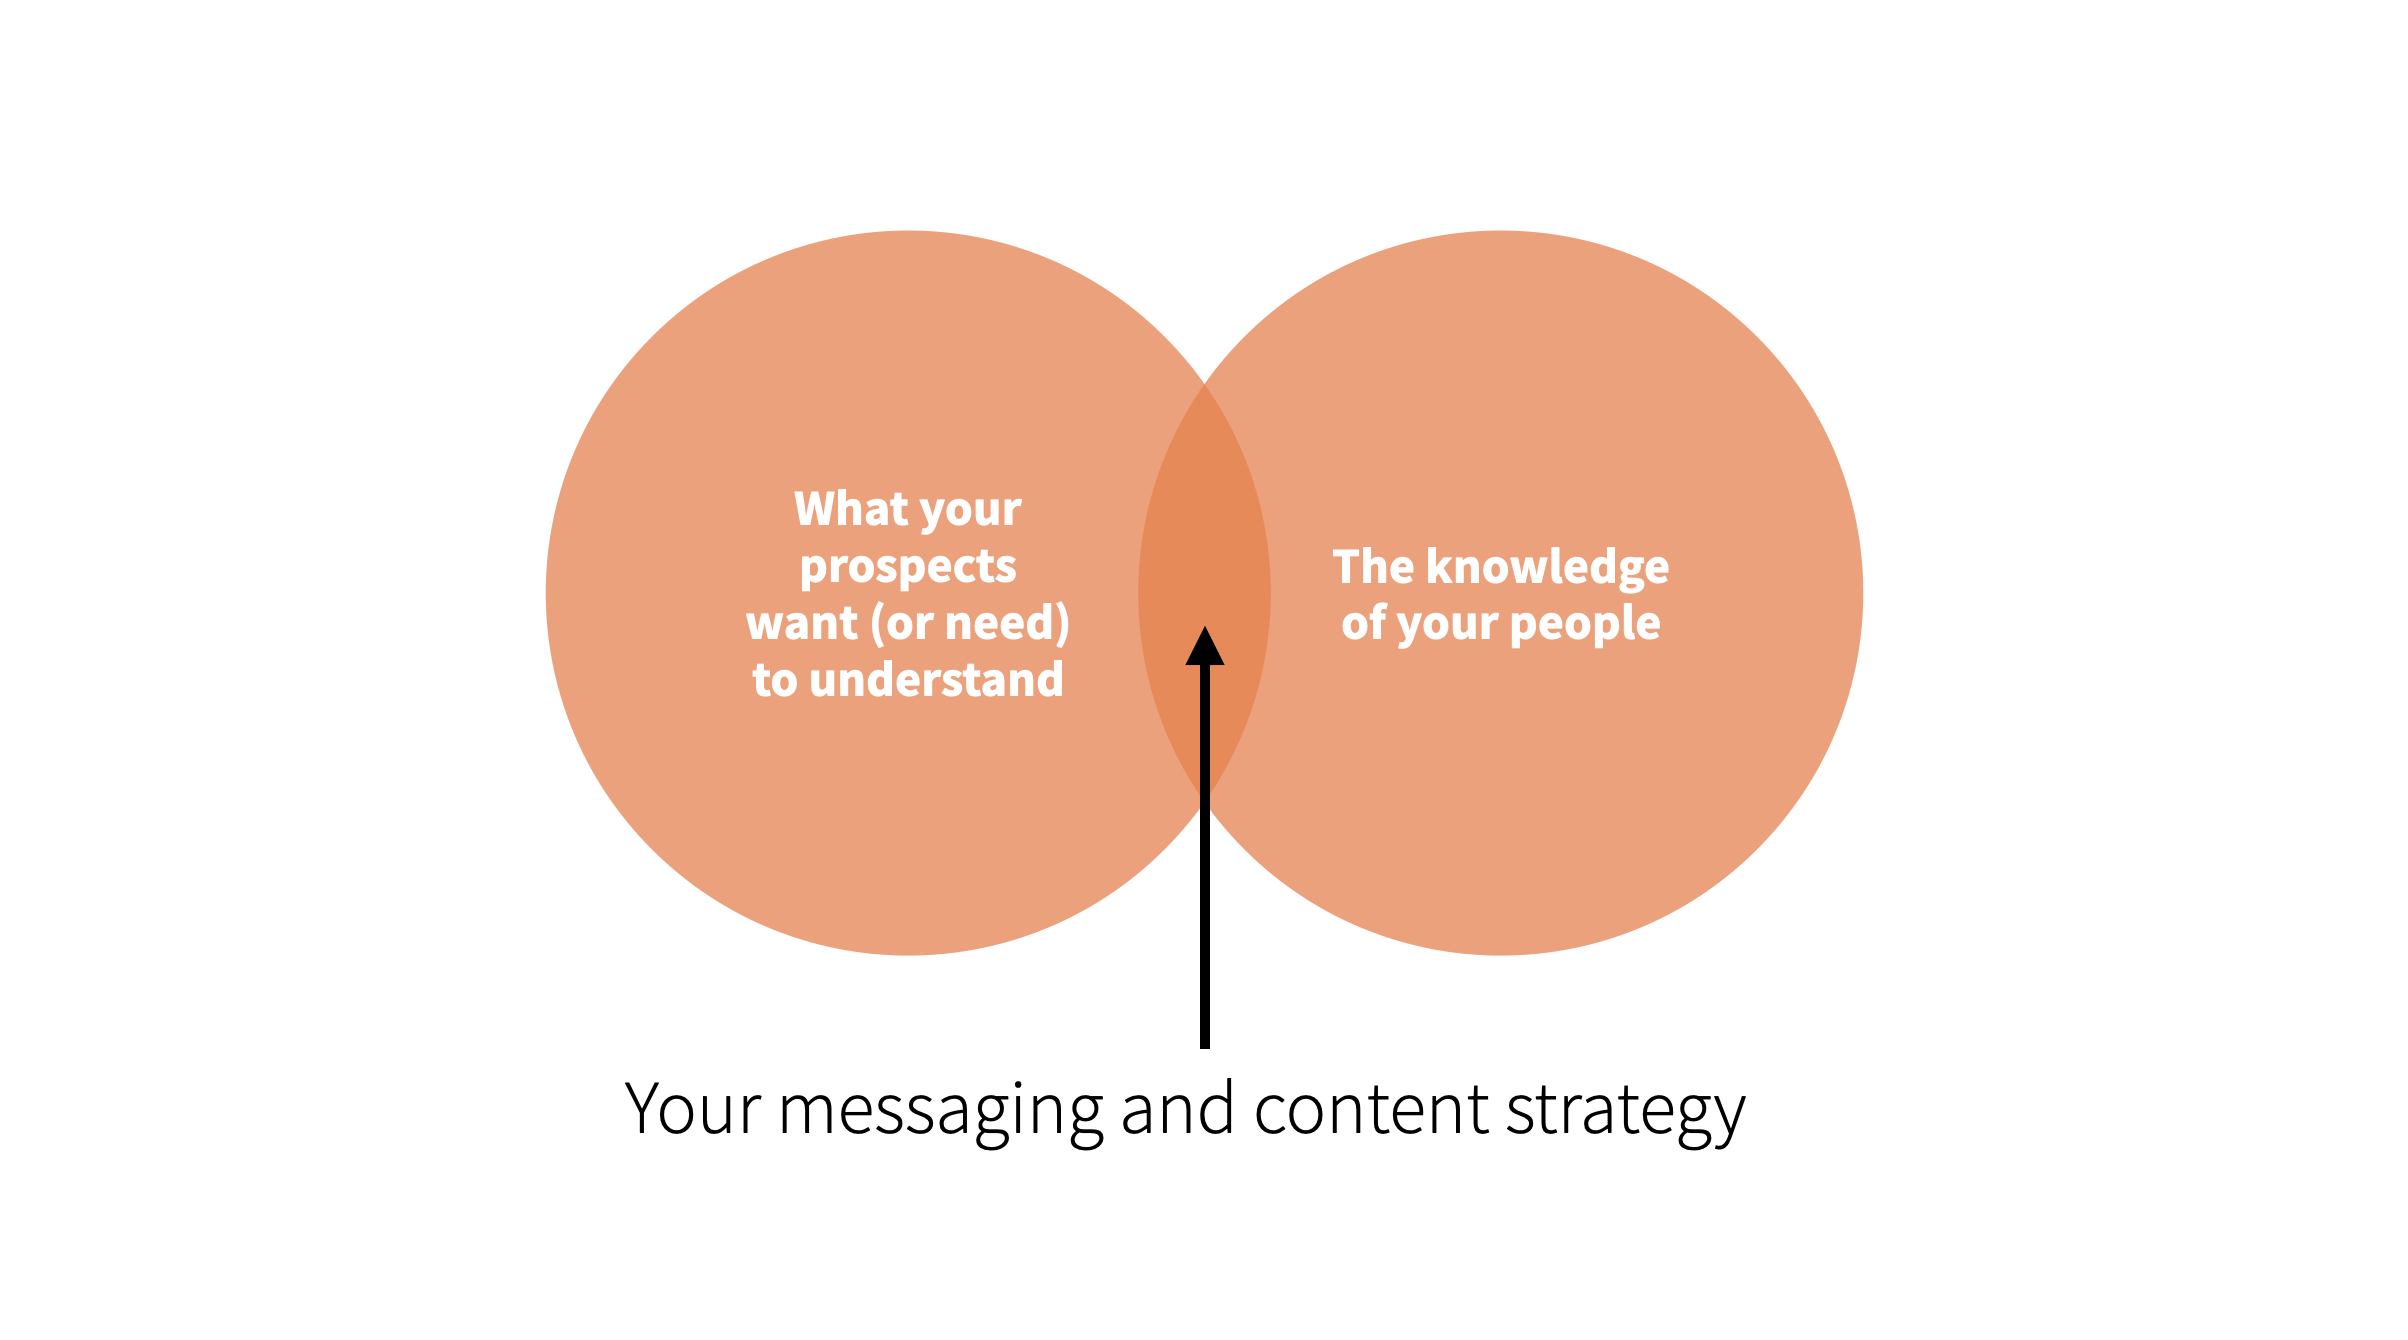 venn diagram, left circle says "What your prospects want (or need) to understand, left circle says "the knowledge of your people", the overlapping section says "your messaging and content strategy"